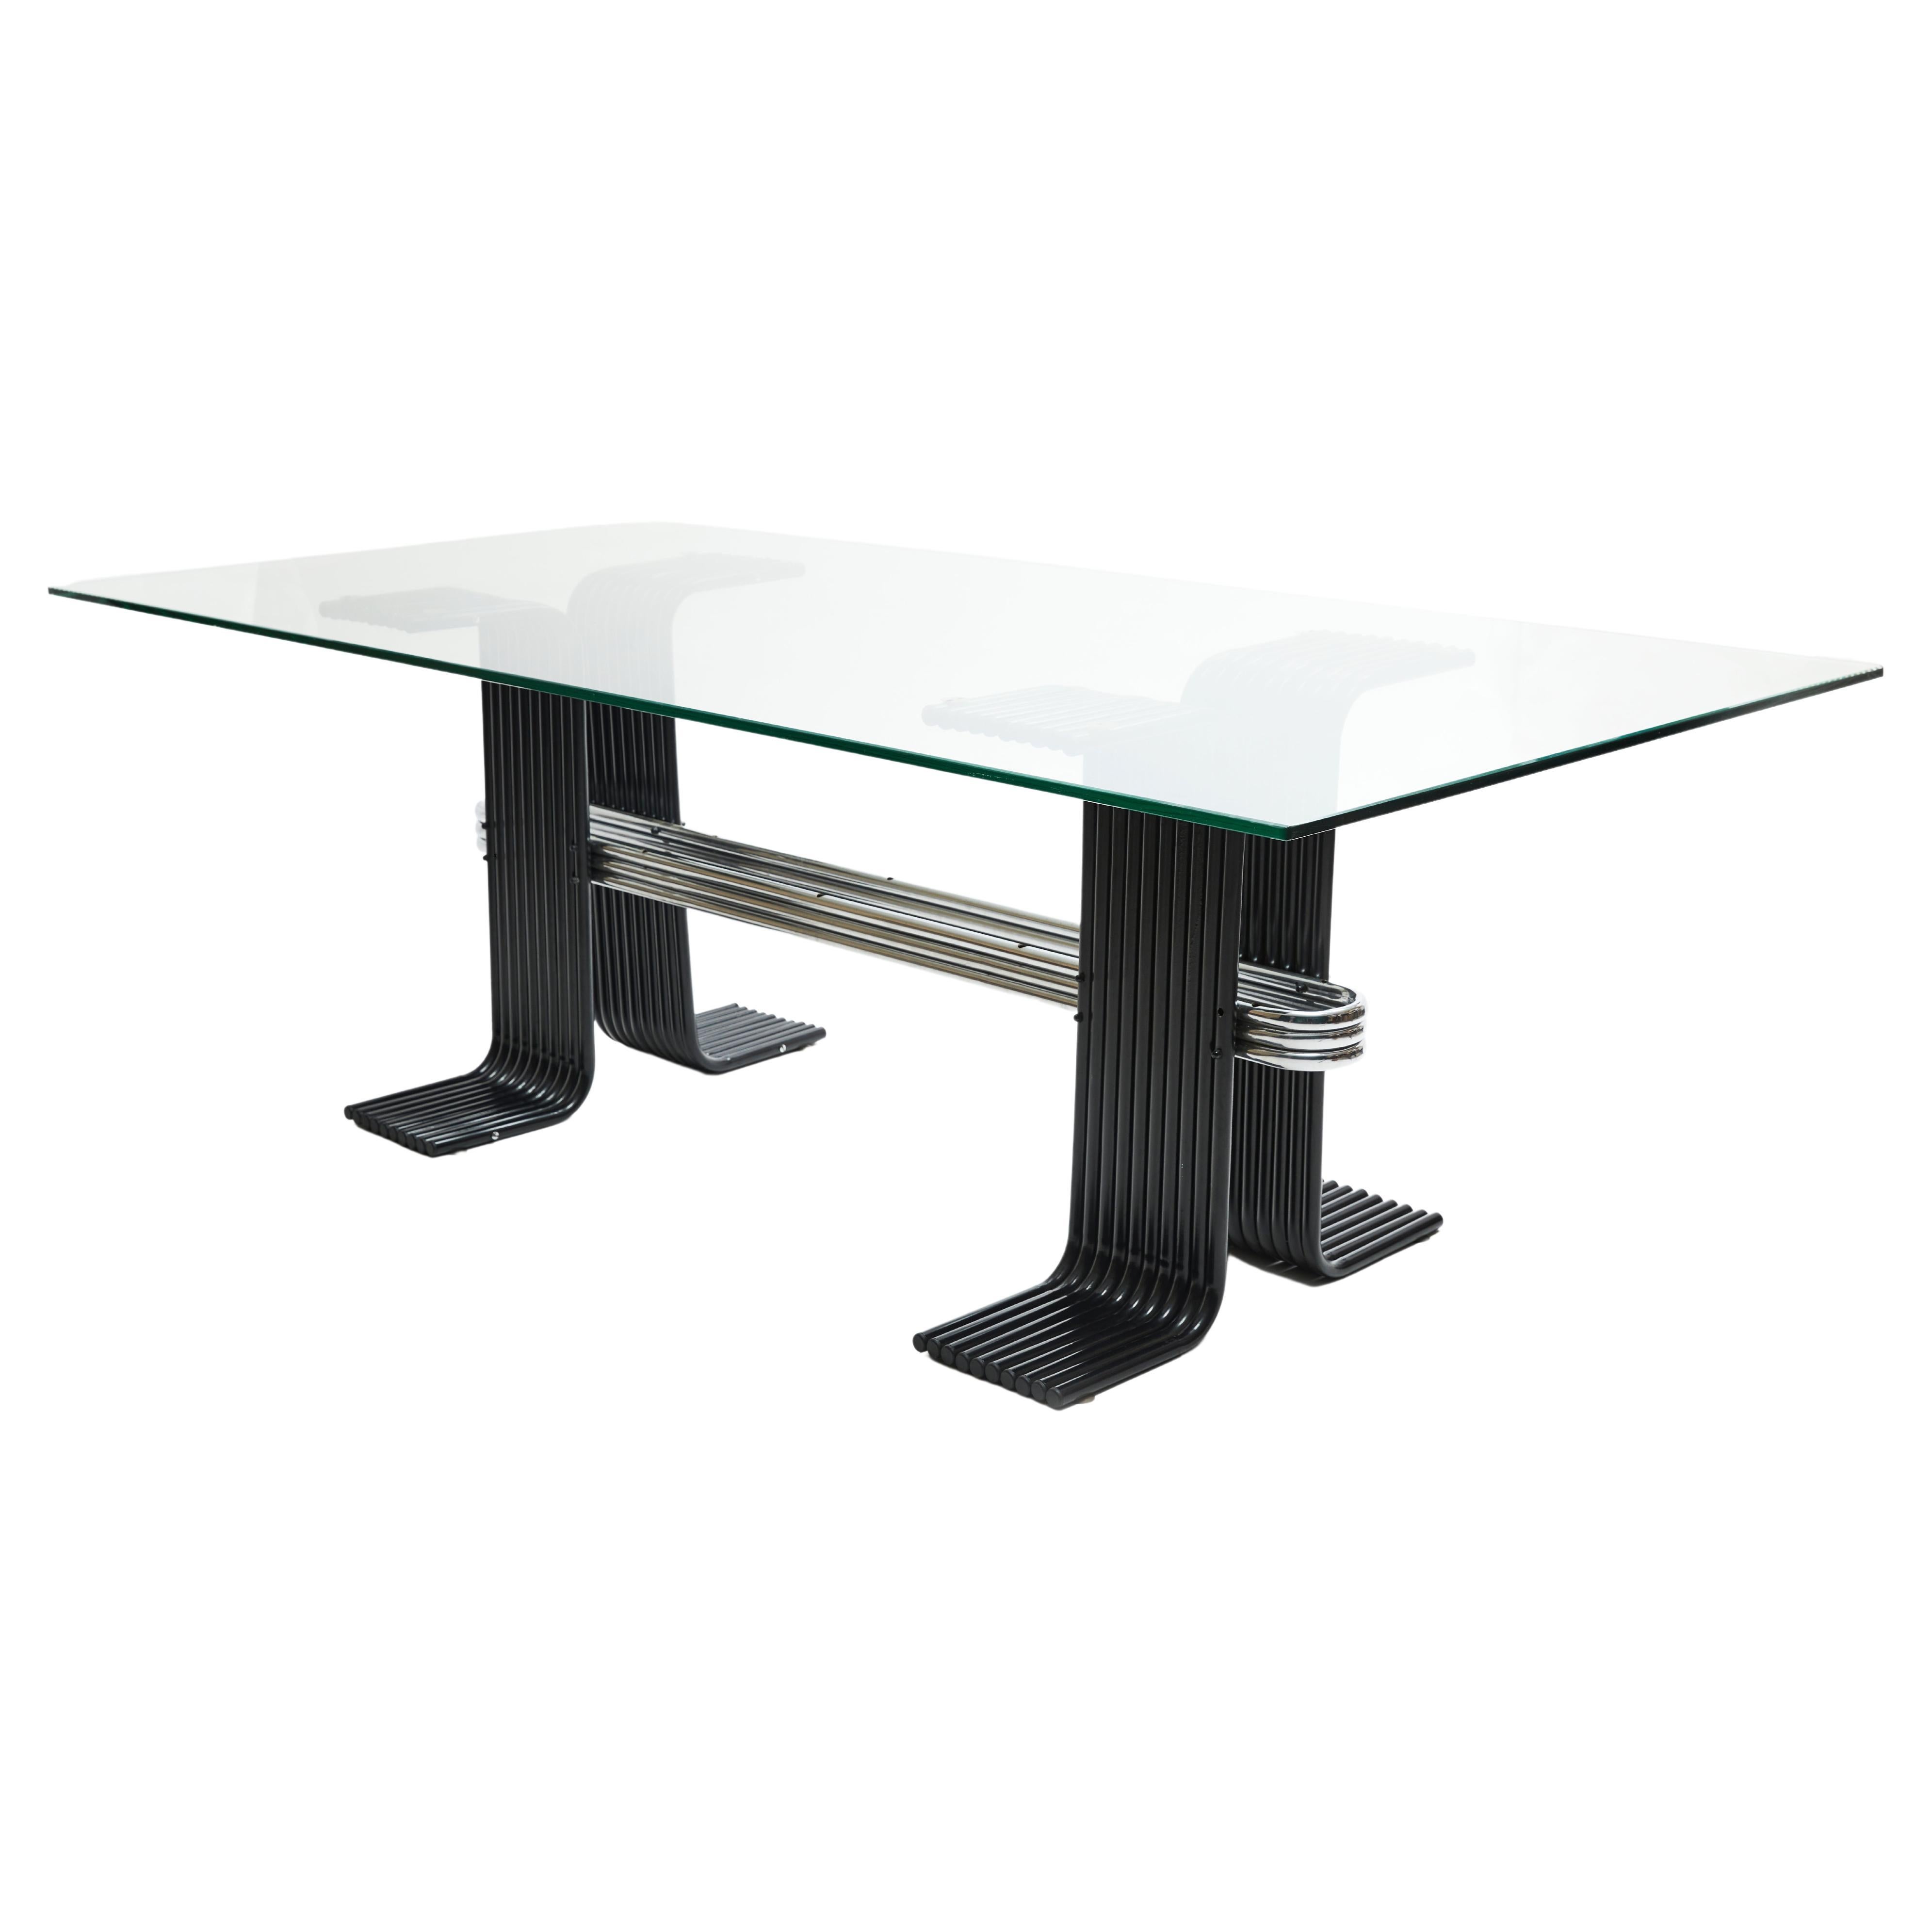 Brazilian Modern Dining Table in Black Painted Iron, Chrome & Glass, Forma, 1970